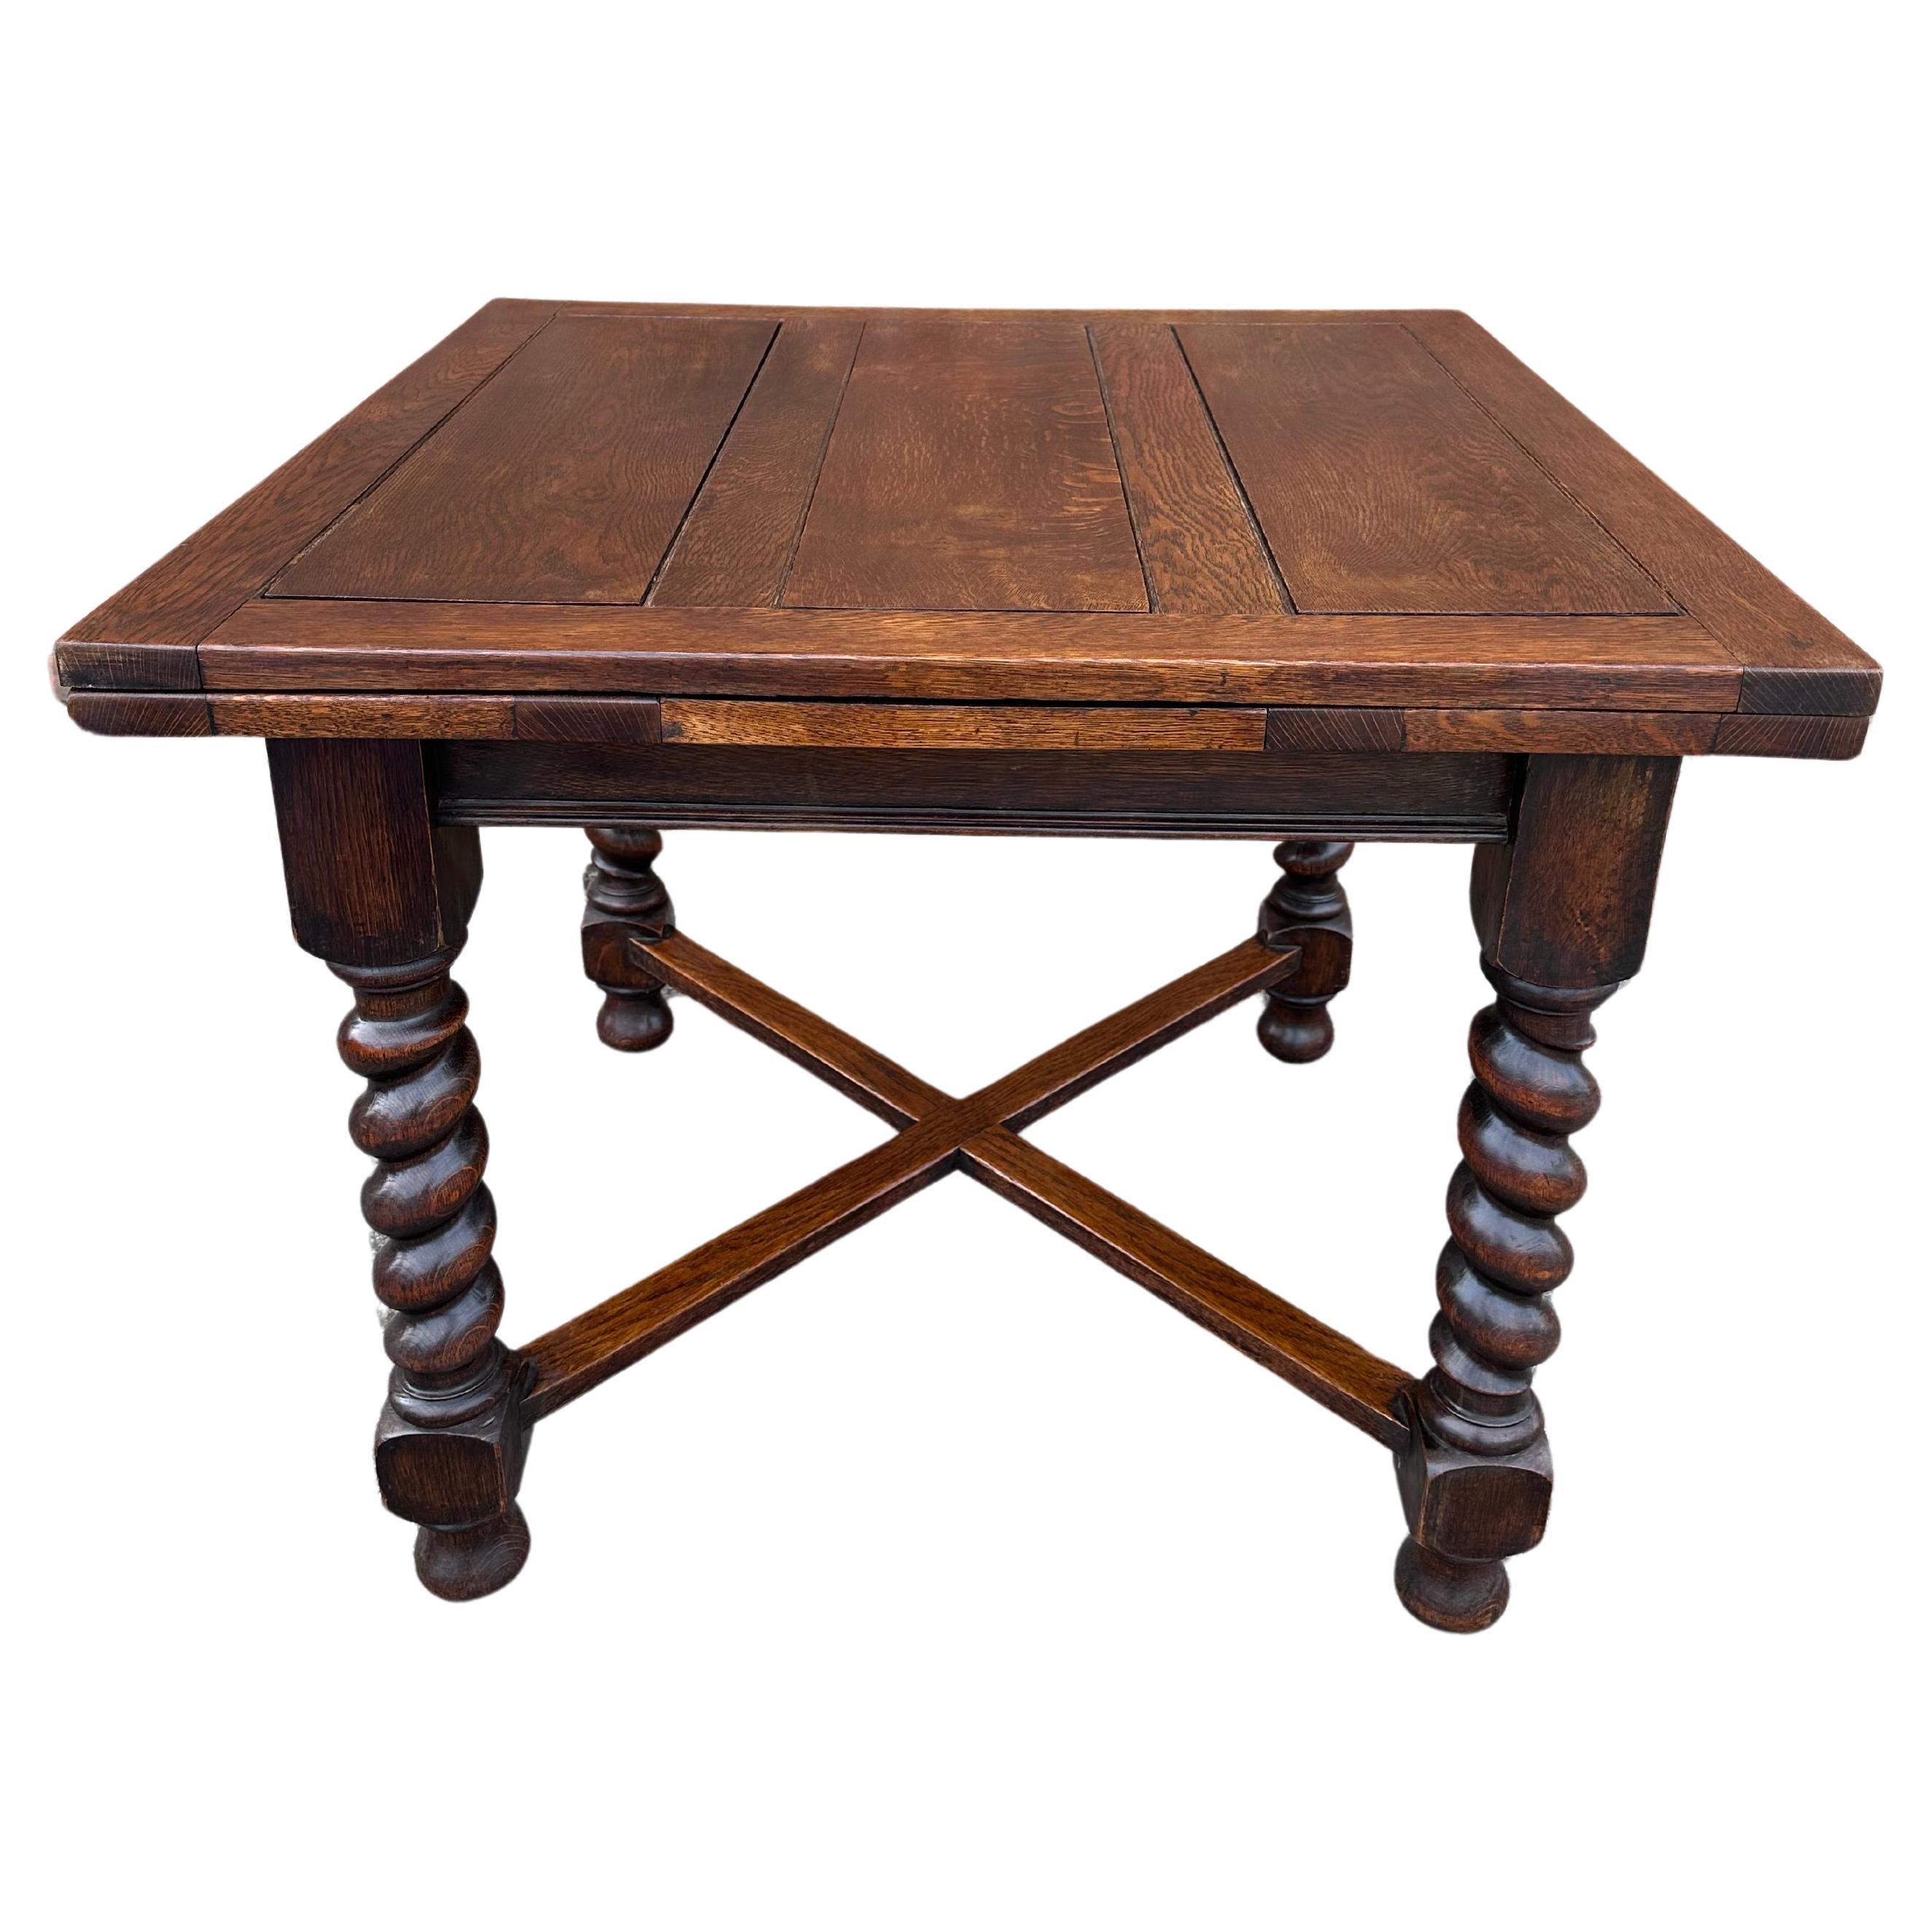 Antique English Draw Leaf Table Game Table